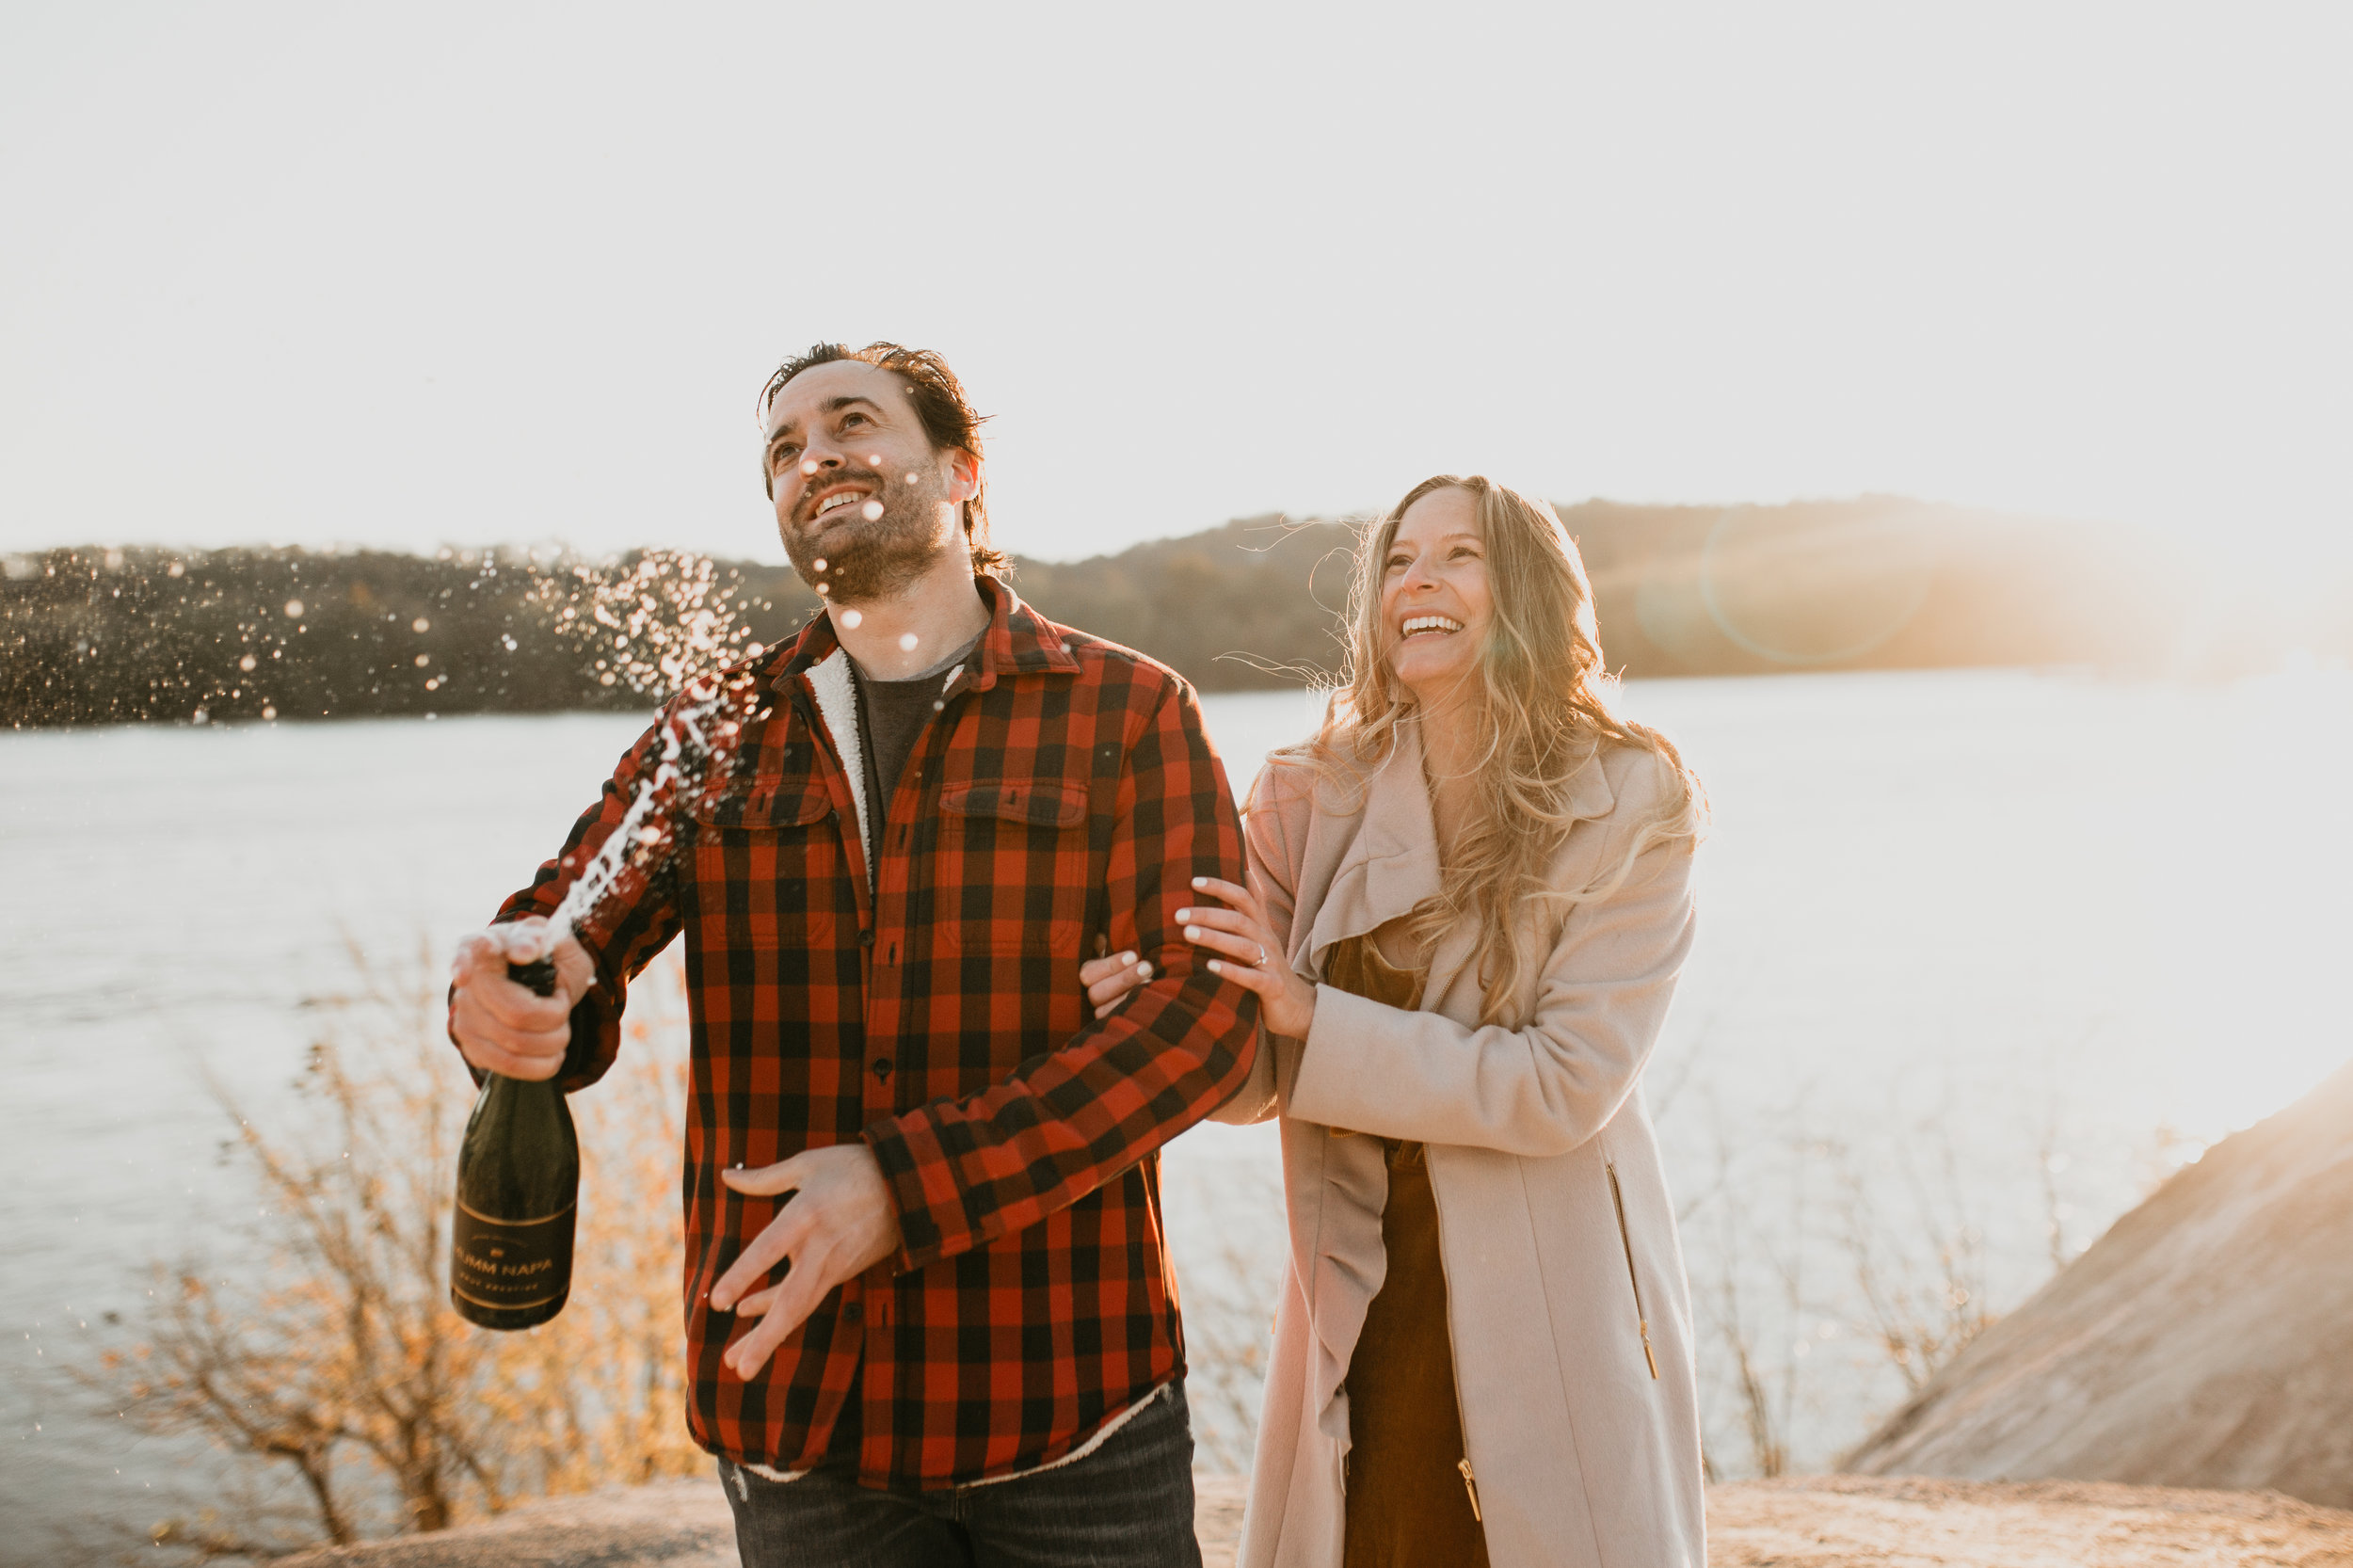 nicole-daacke-photography-white-cliffs-of-conoy-in-lancaster-pa-pennsylvania-adventure-session-adventure-elopement-photographer-engagement session-in-lancaster-pa-photographer-golden-sunset-winter-solstice-wedding-riverside-elopement-4120.jpg